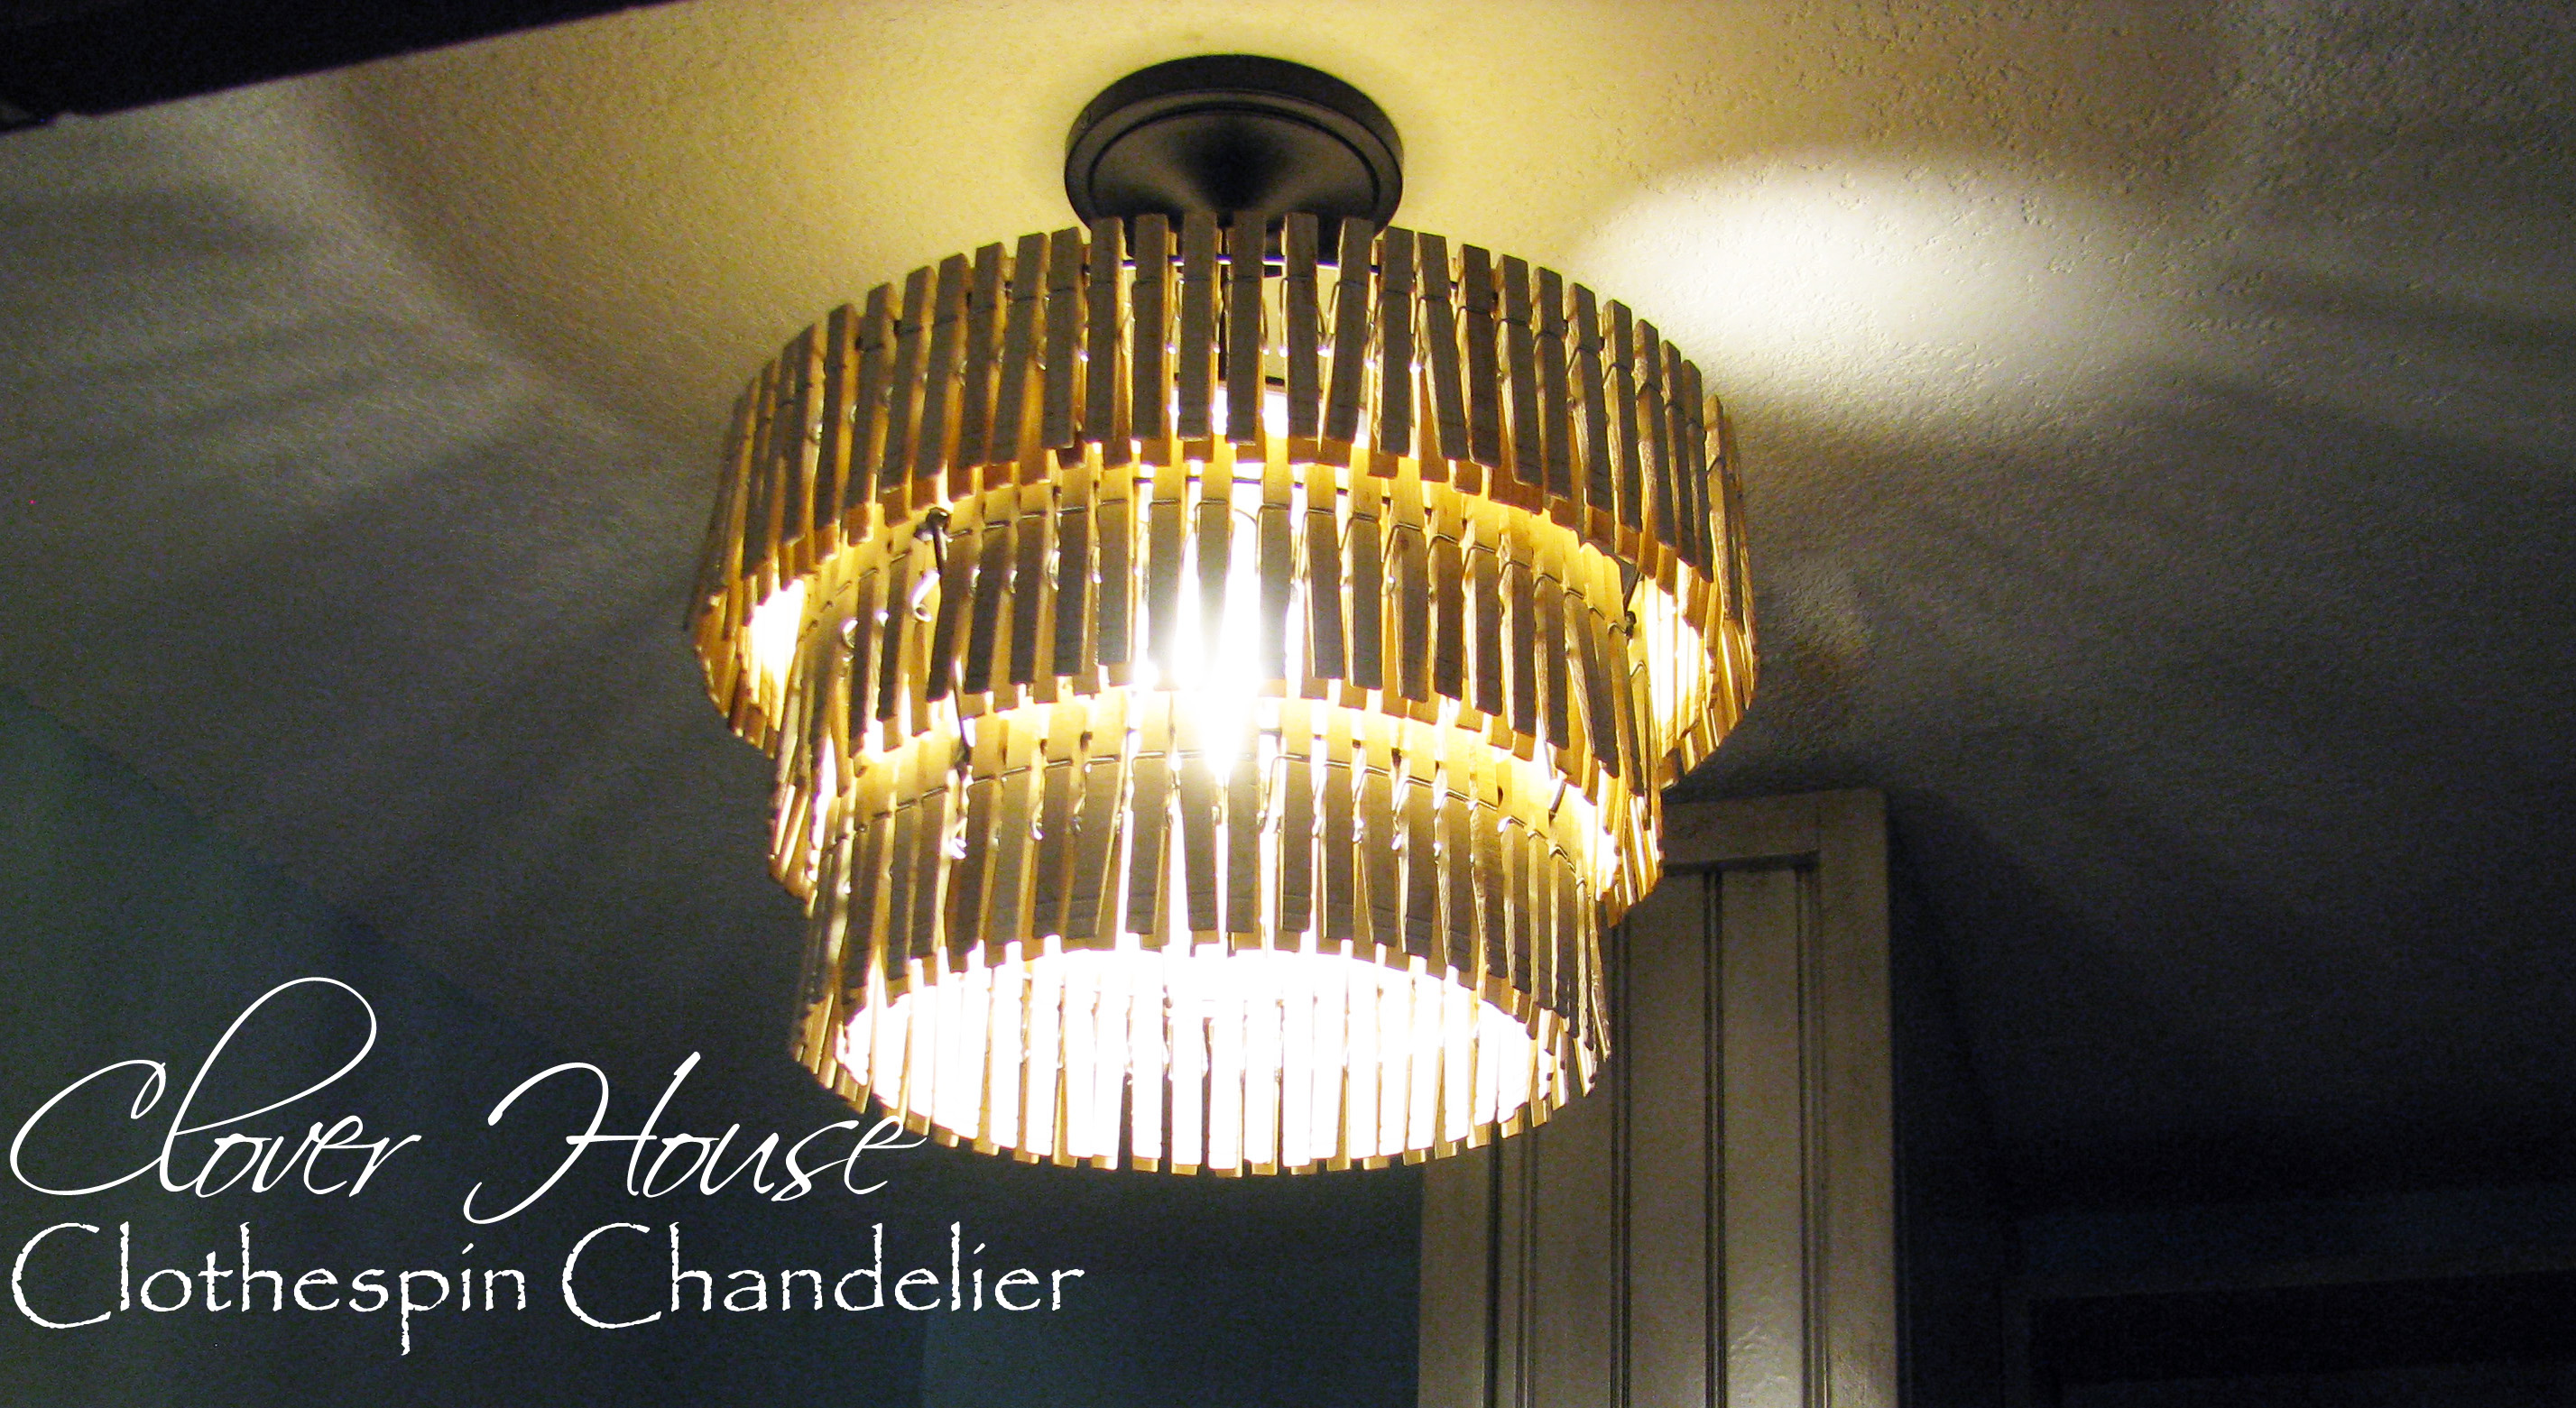 3 Tiered Clothespin Chandelier